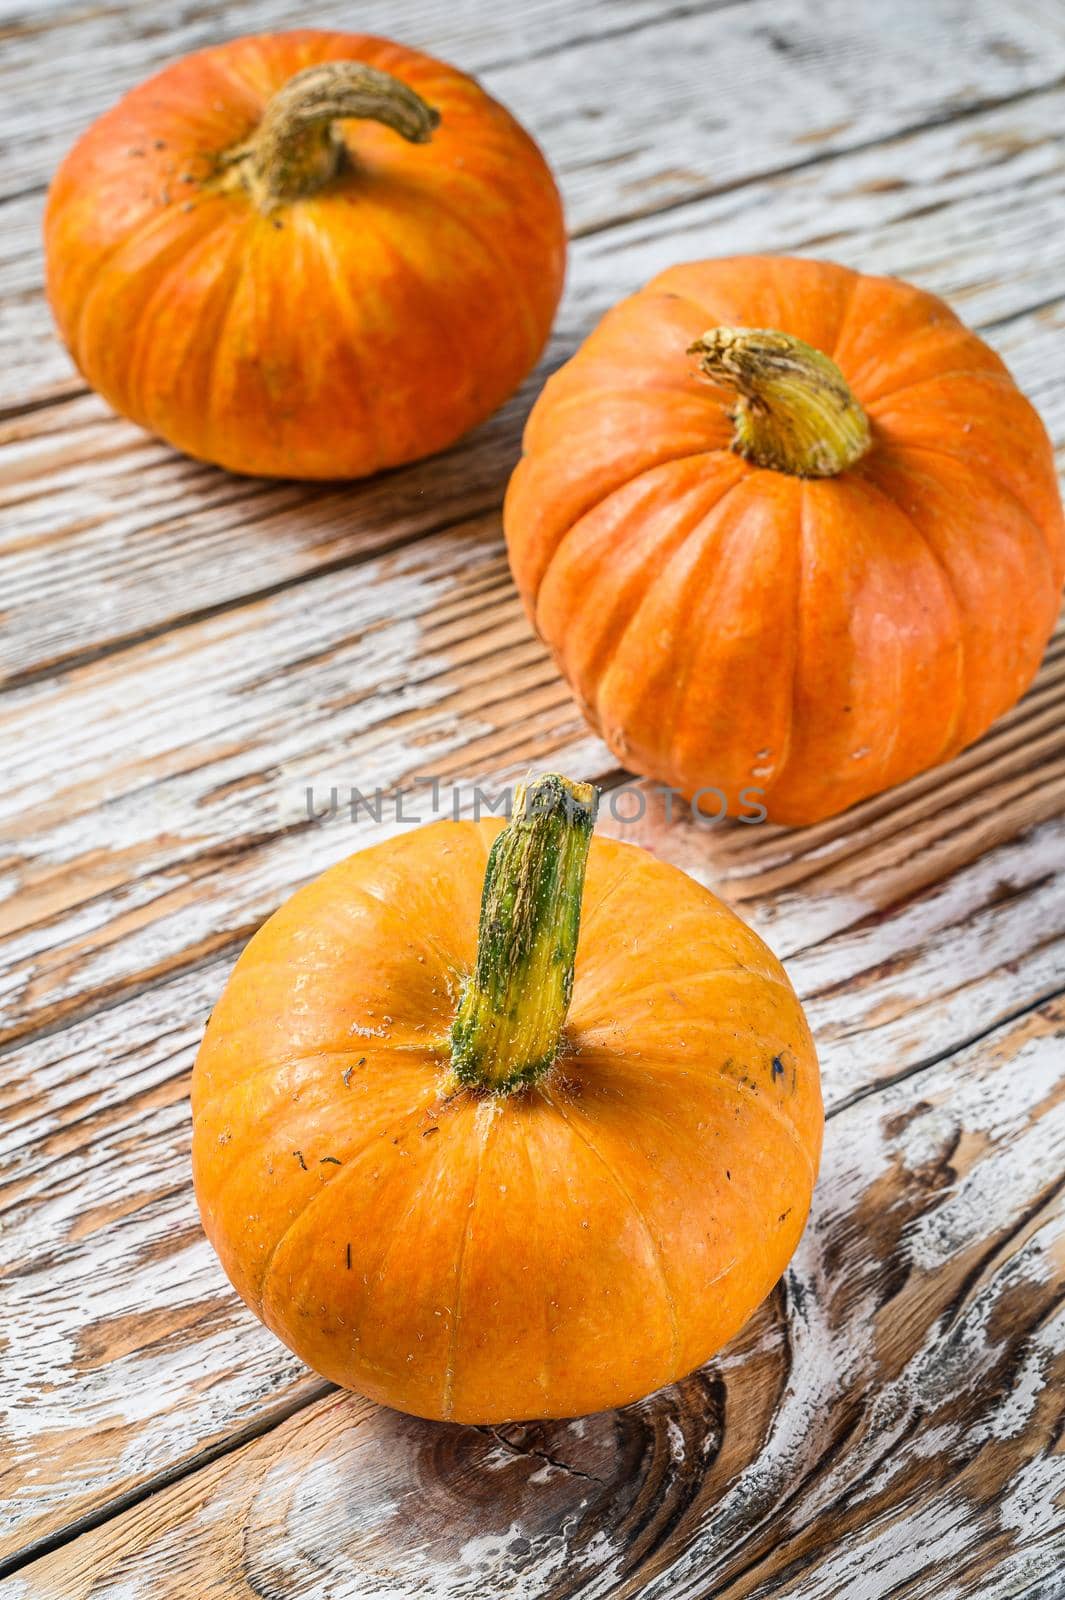 Autumn Pumpkin Thanksgiving Background, orange pumpkins on a wooden table. White wooden background. Top view by Composter